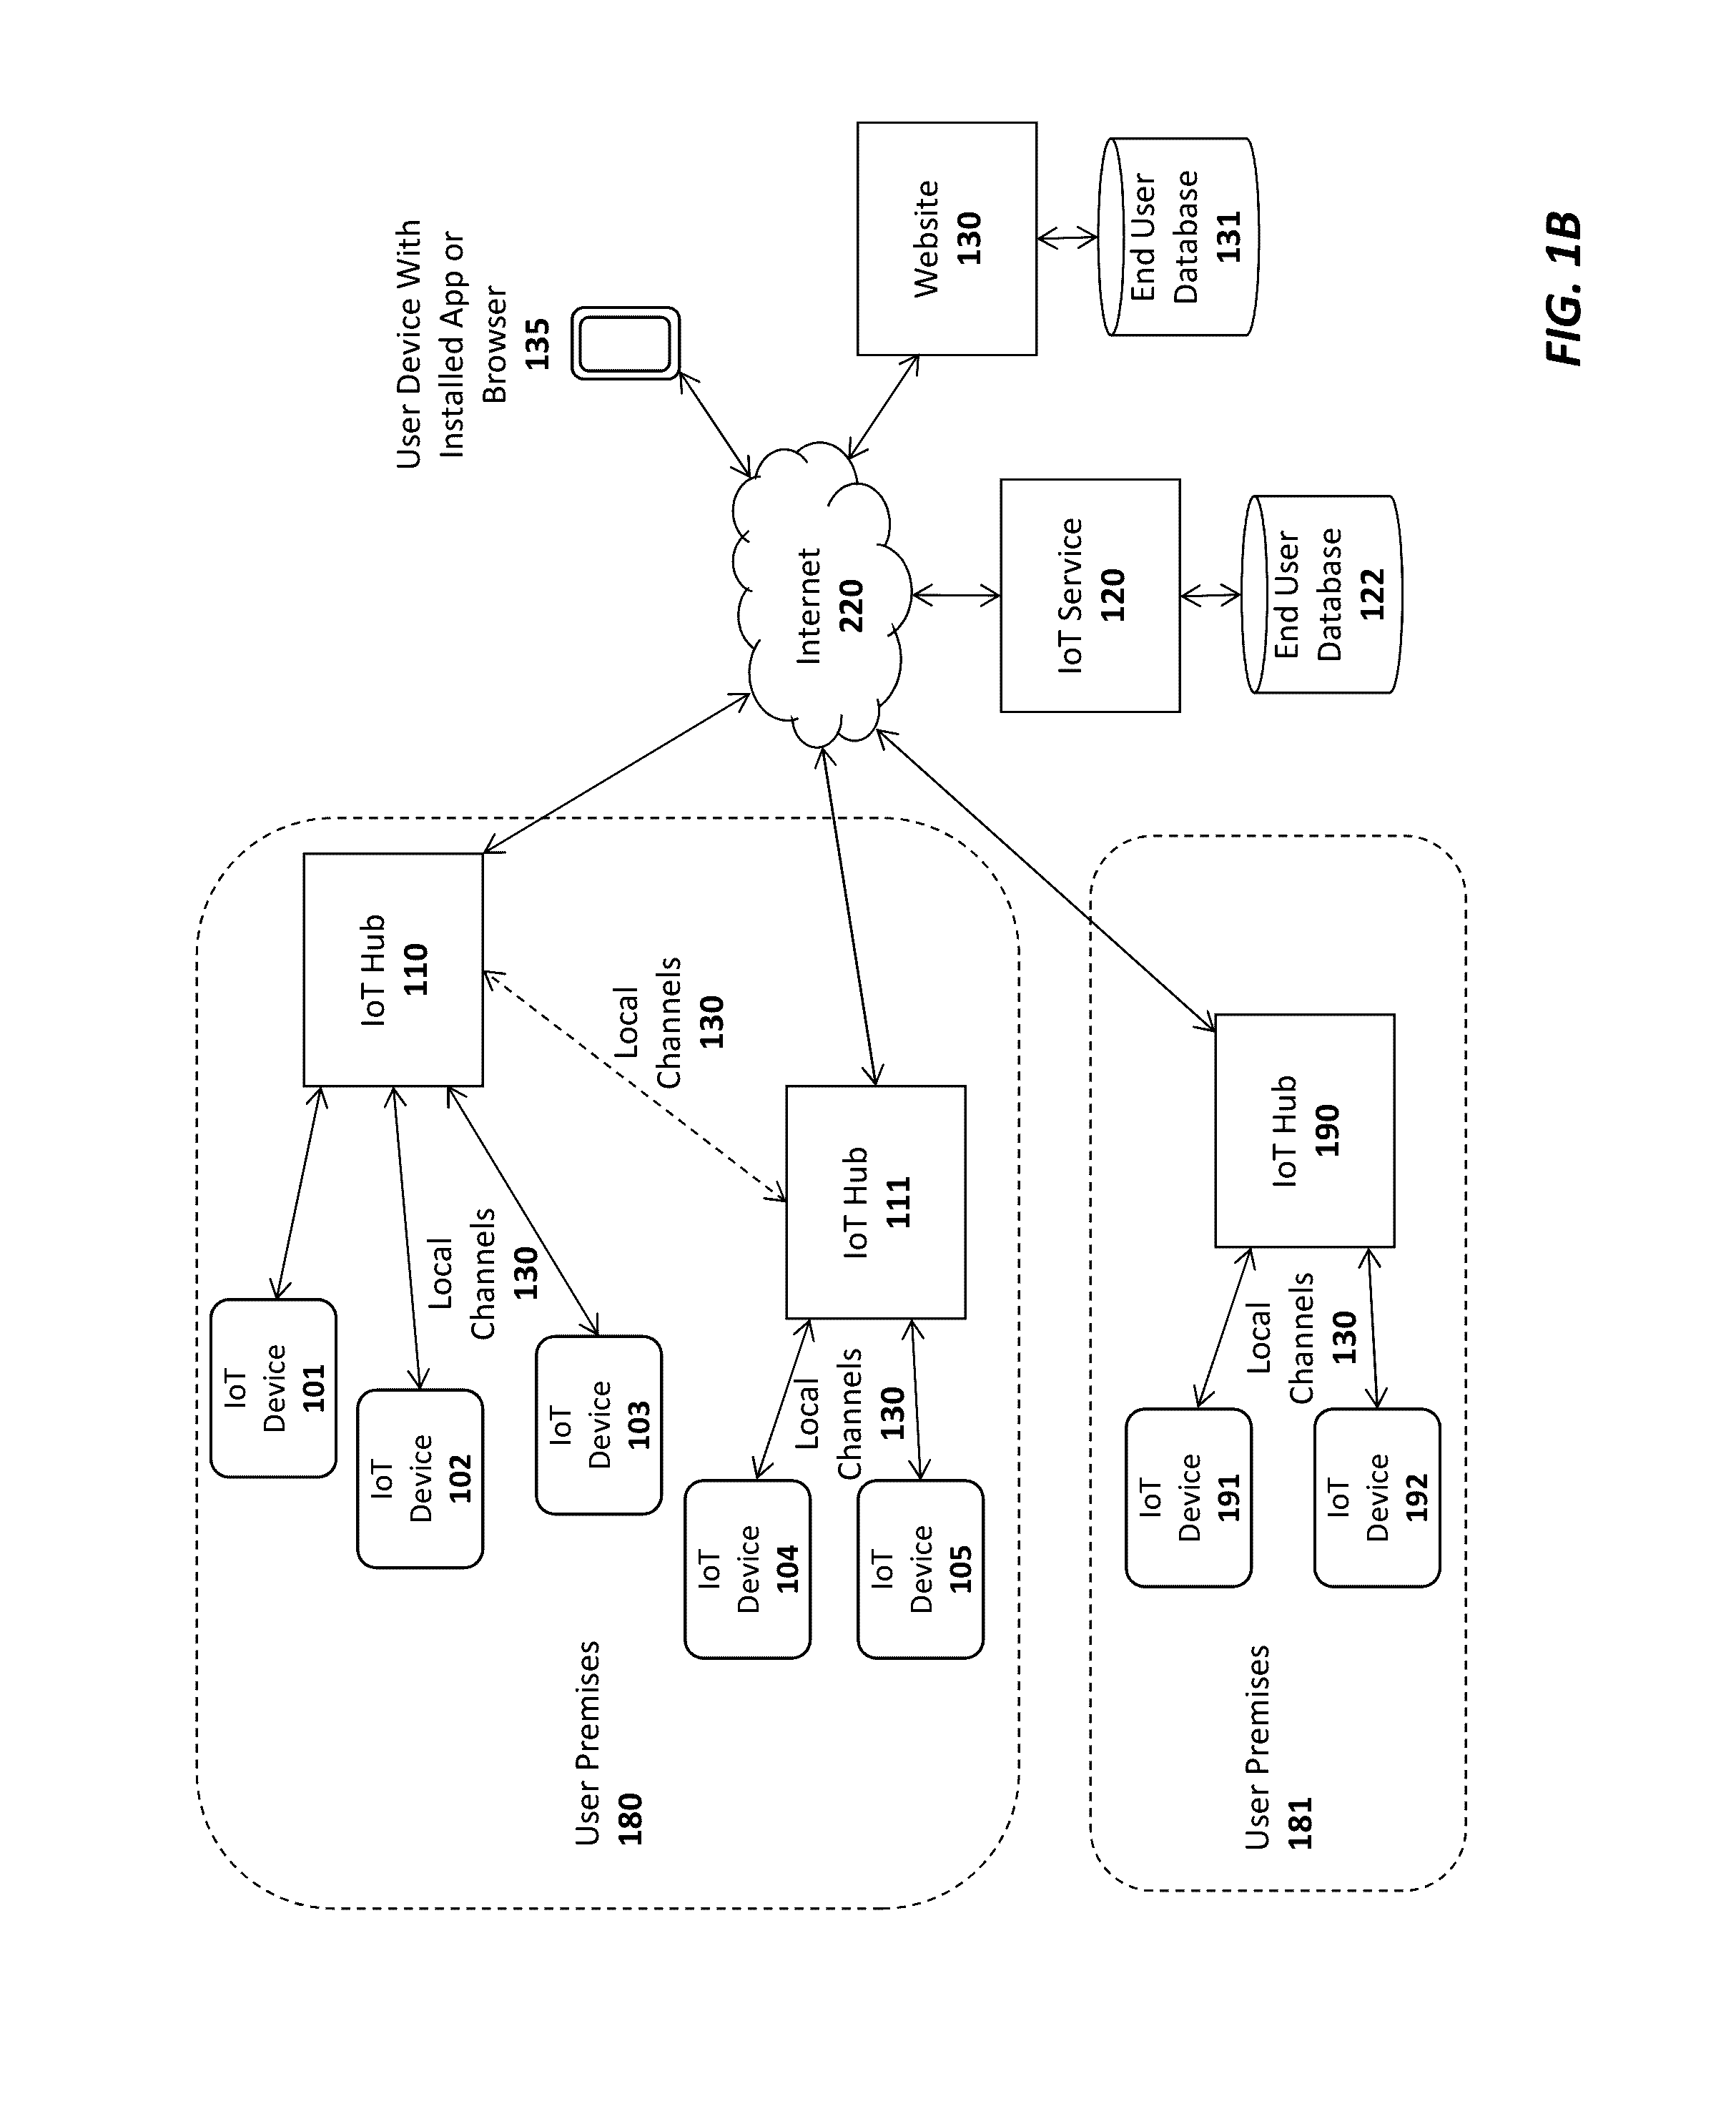 System and method for virtual internet of things (IOT) devices and hubs